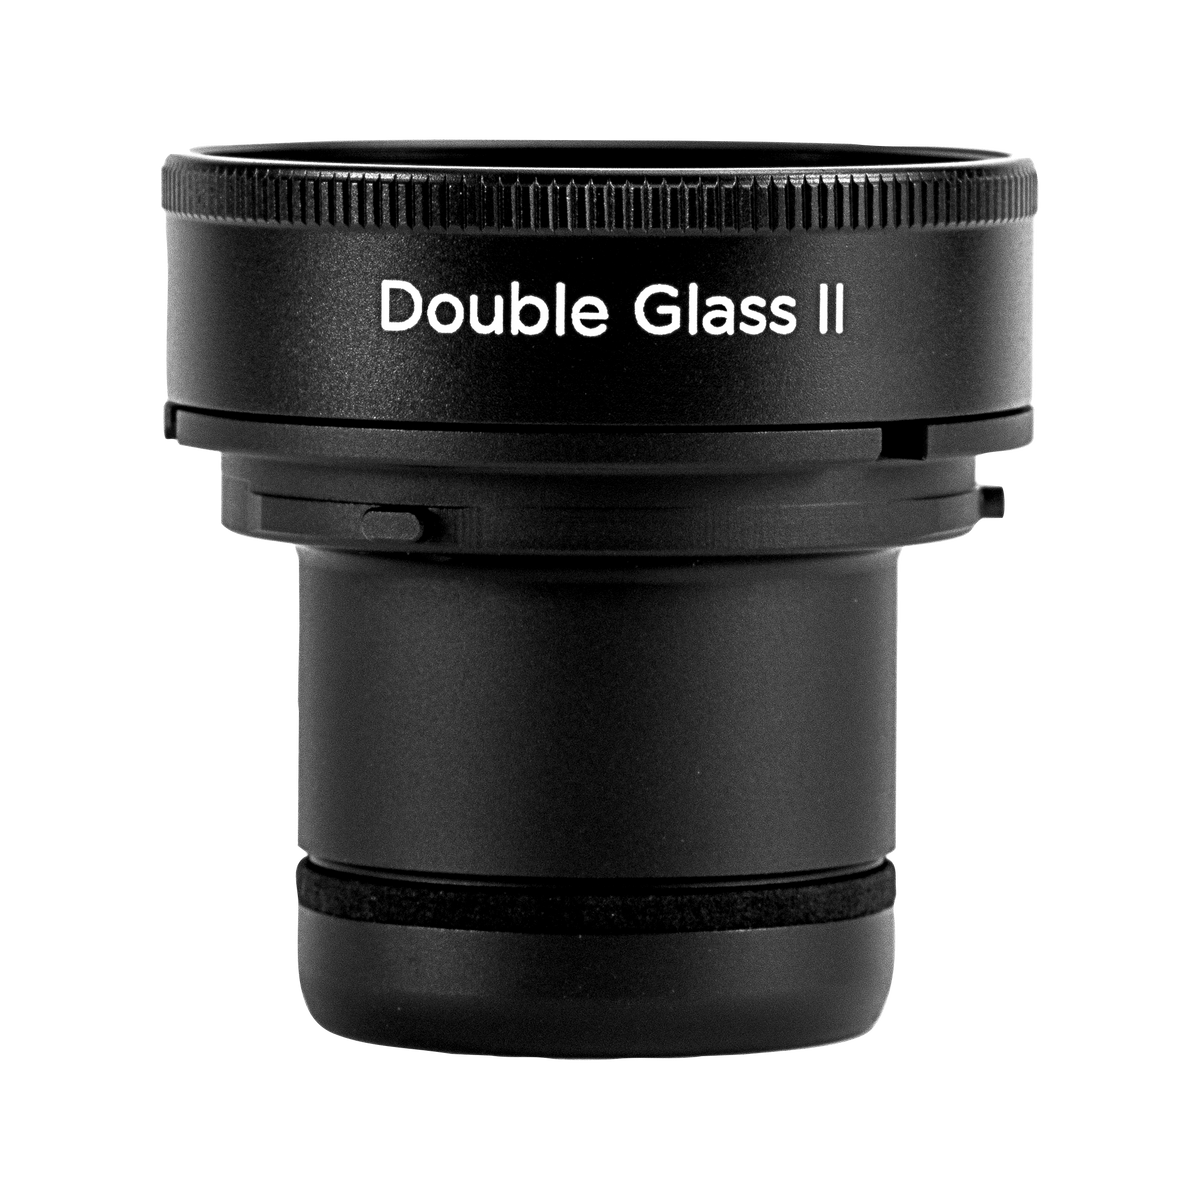 Double Glass II Optic Only - Lensbaby Creative Effect Camera Lenses